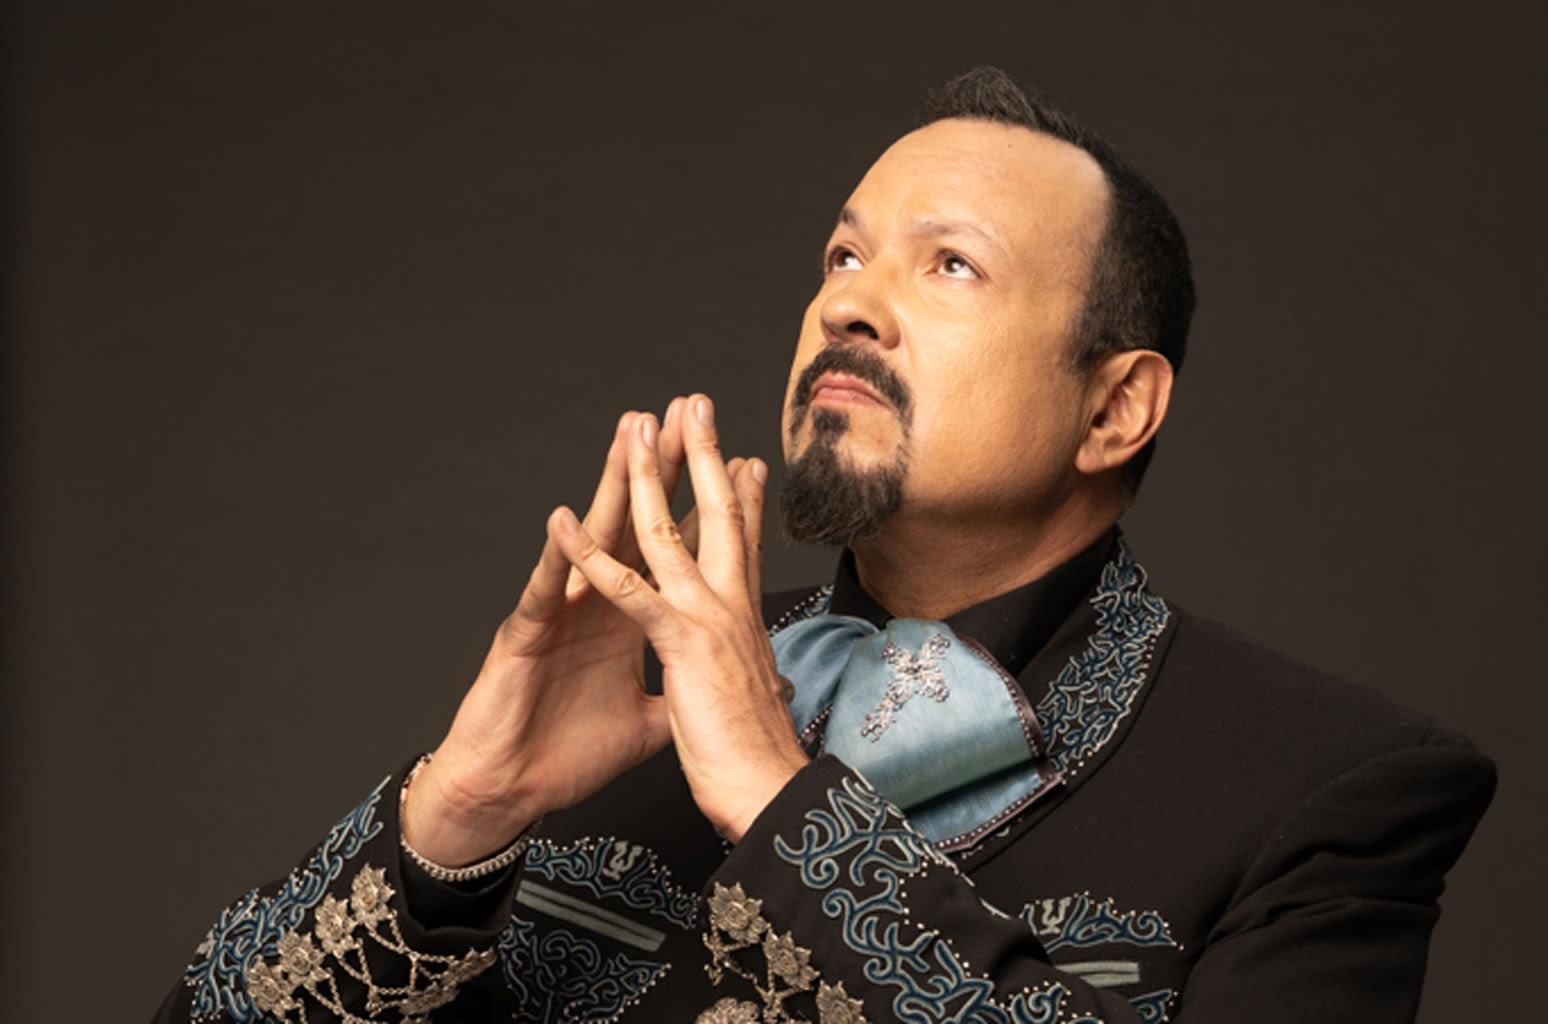 Pepe Aguilar Gives Blessing to Newlyweds Ángela Aguilar & Christian Nodal